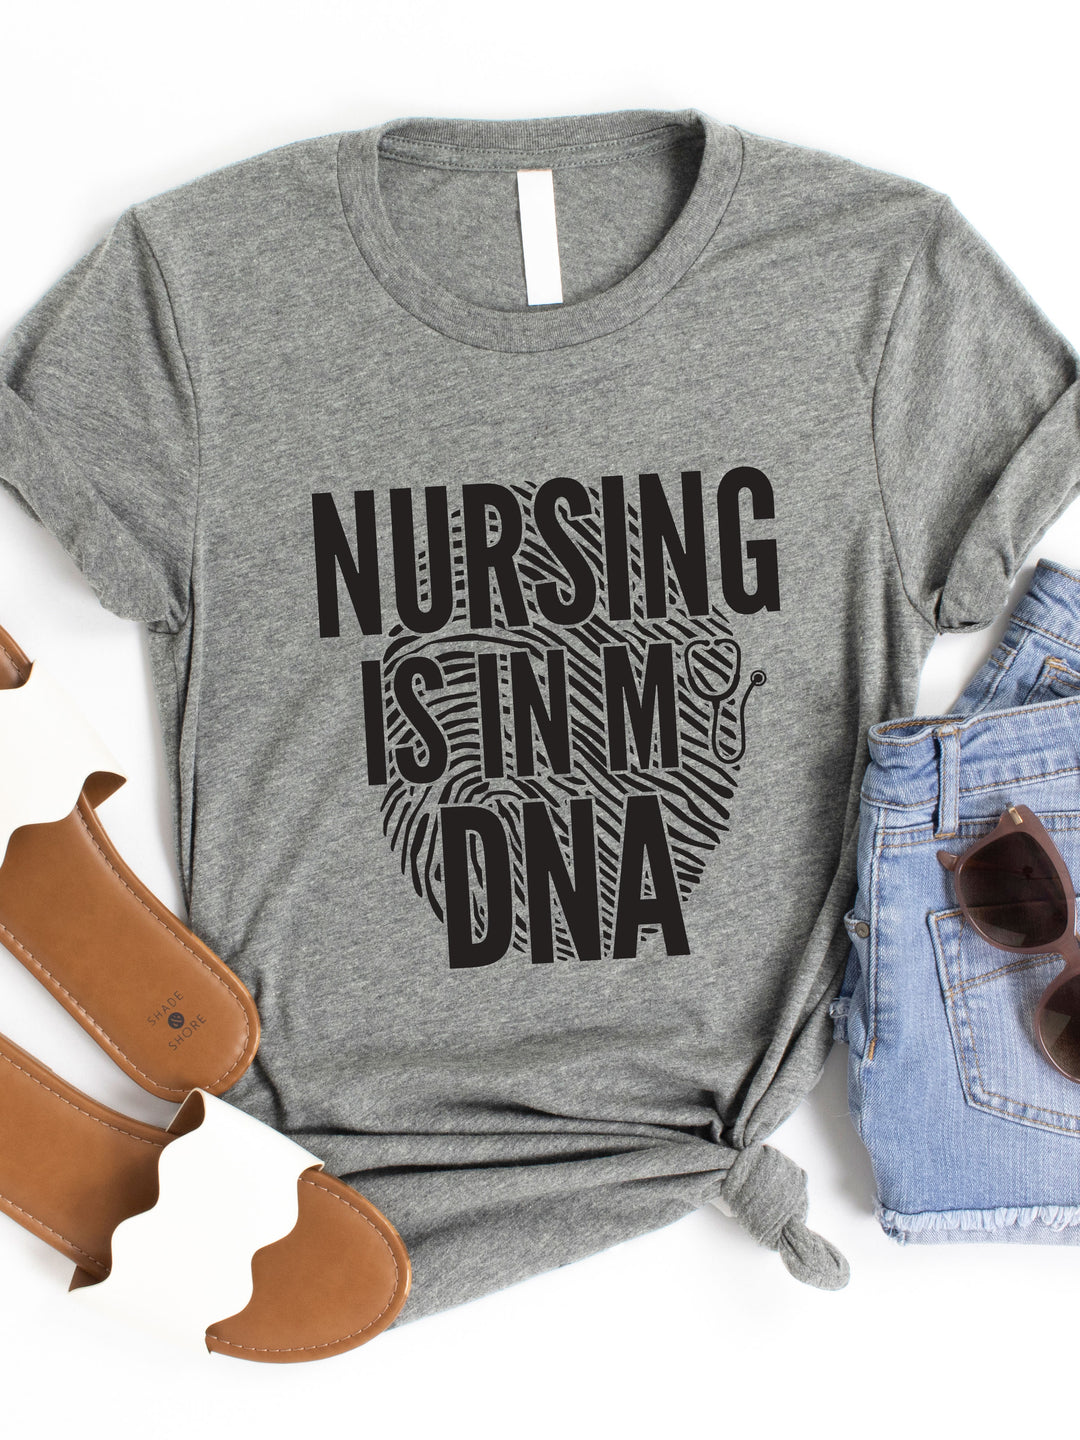 Nursing in is my DNA Graphic Tee